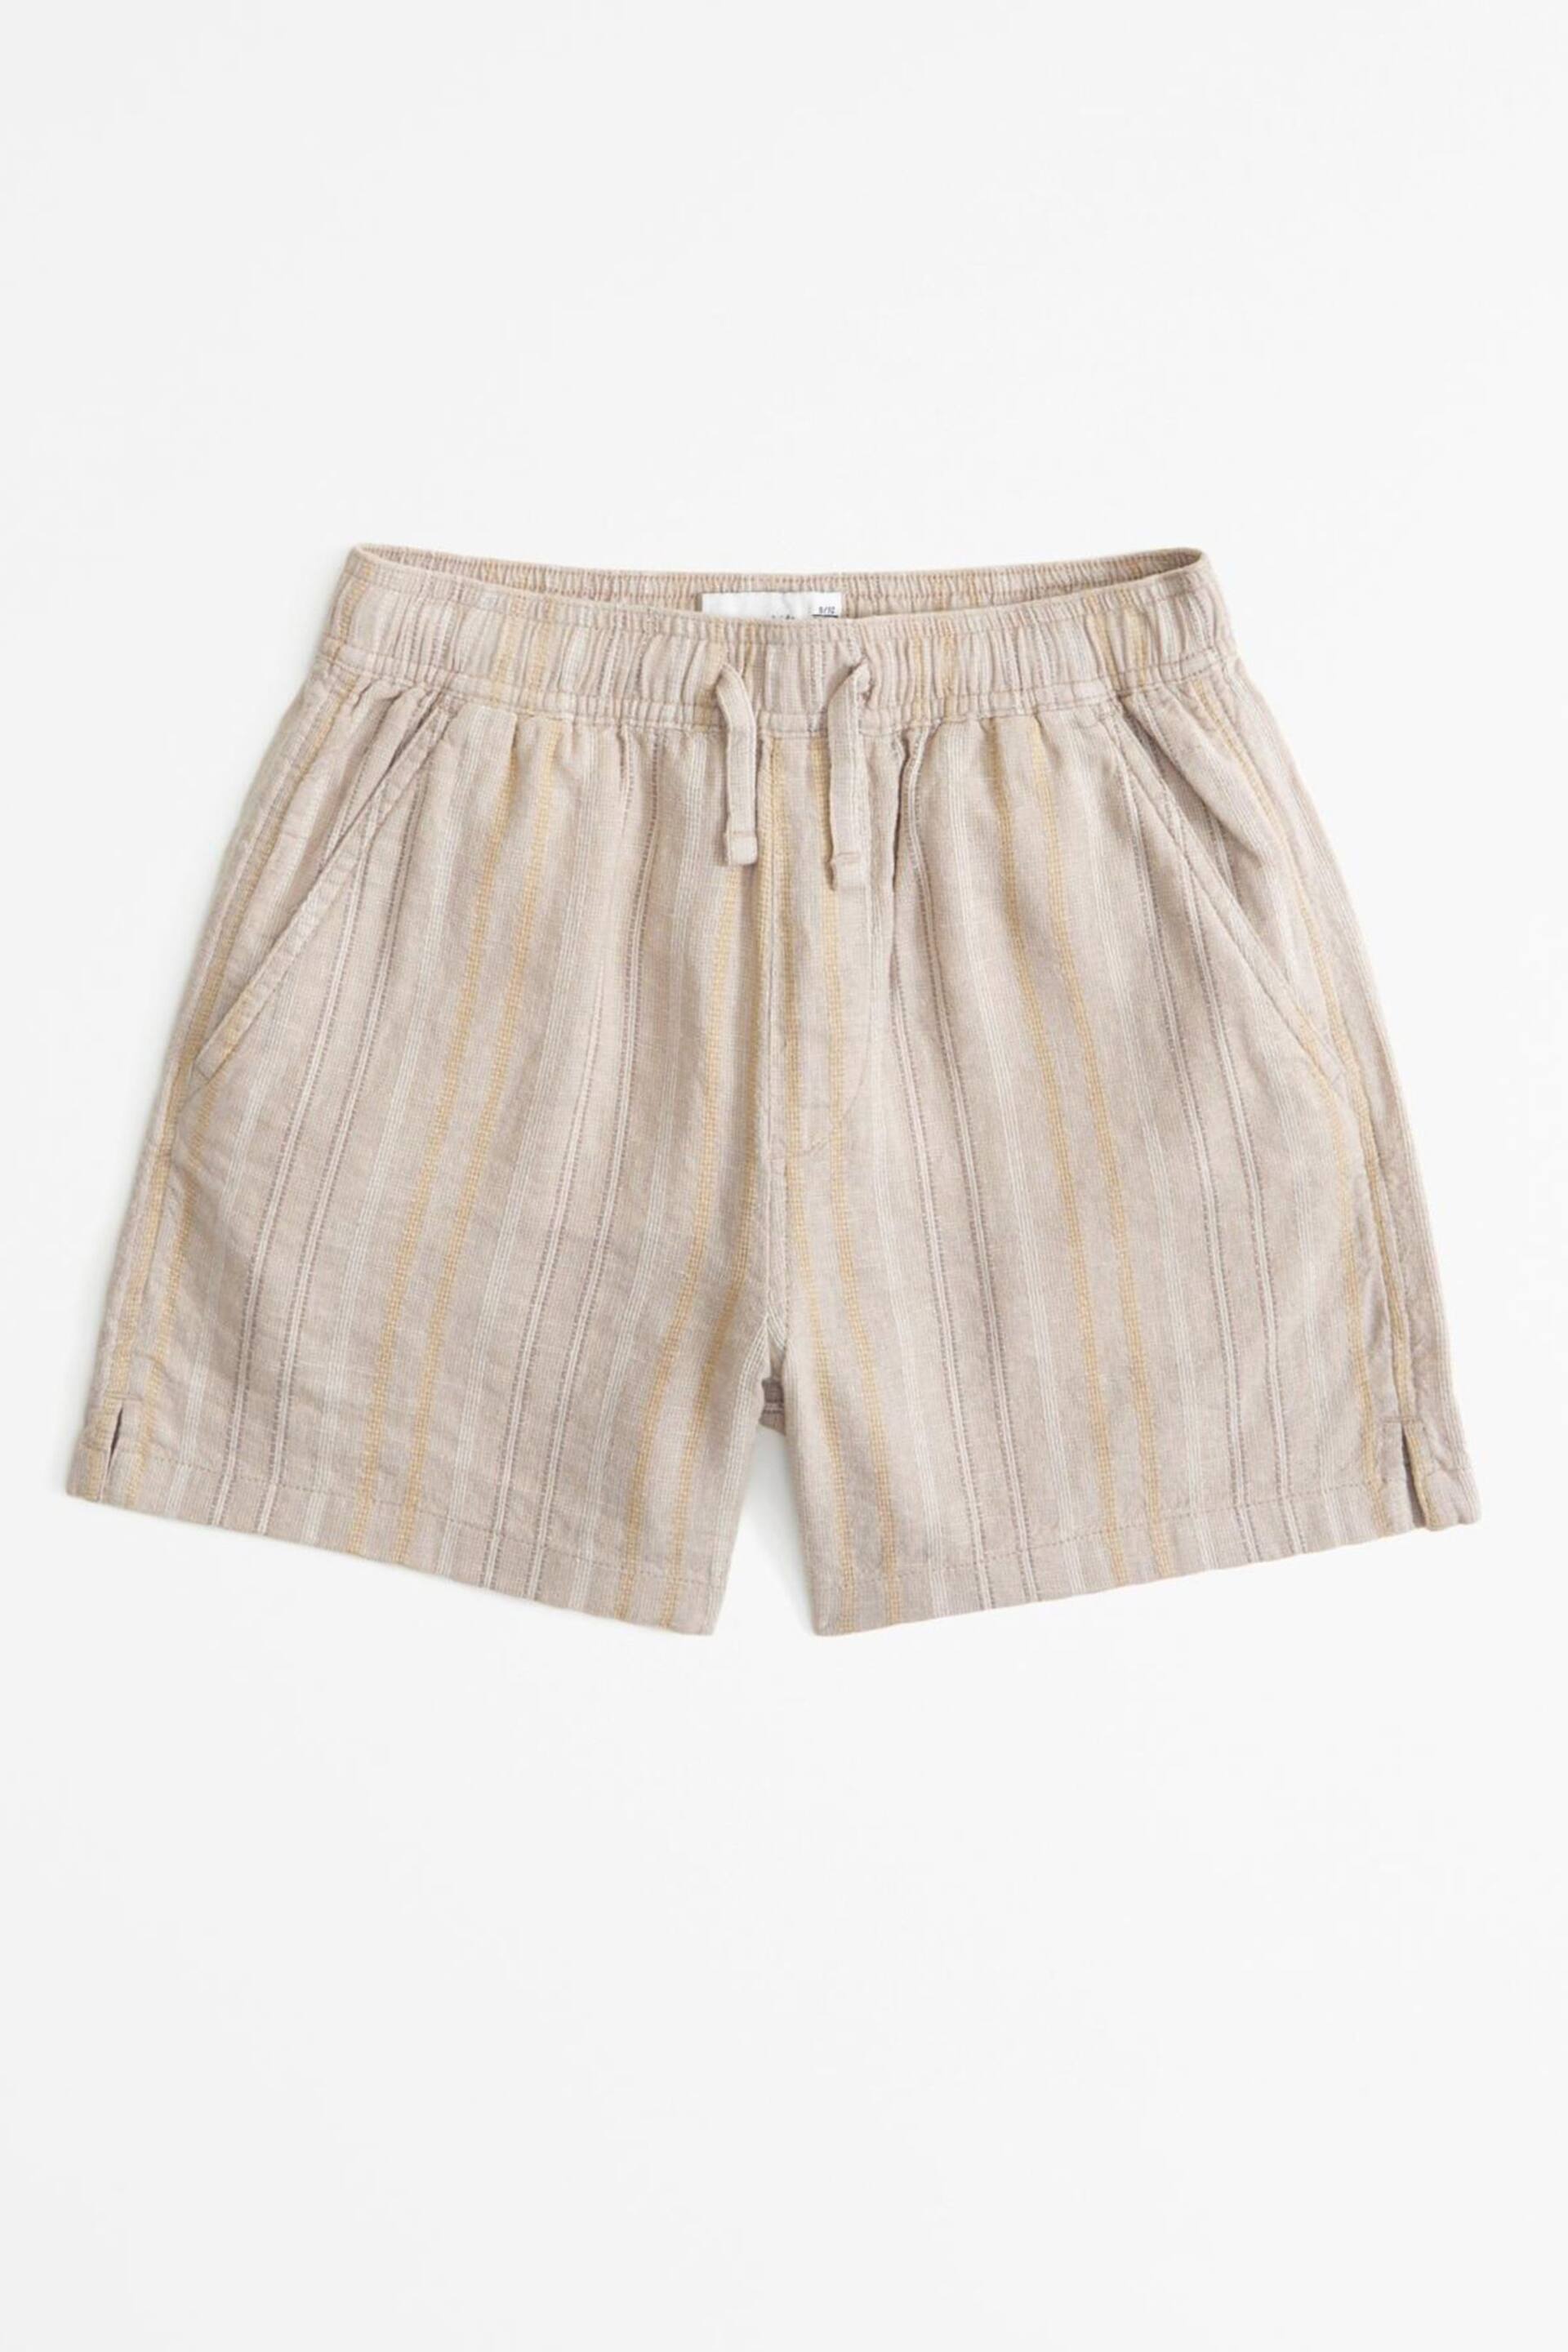 Abercrombie & Fitch Natural Knitted Stripe Short Sleeve Linen Shorts - Image 1 of 2